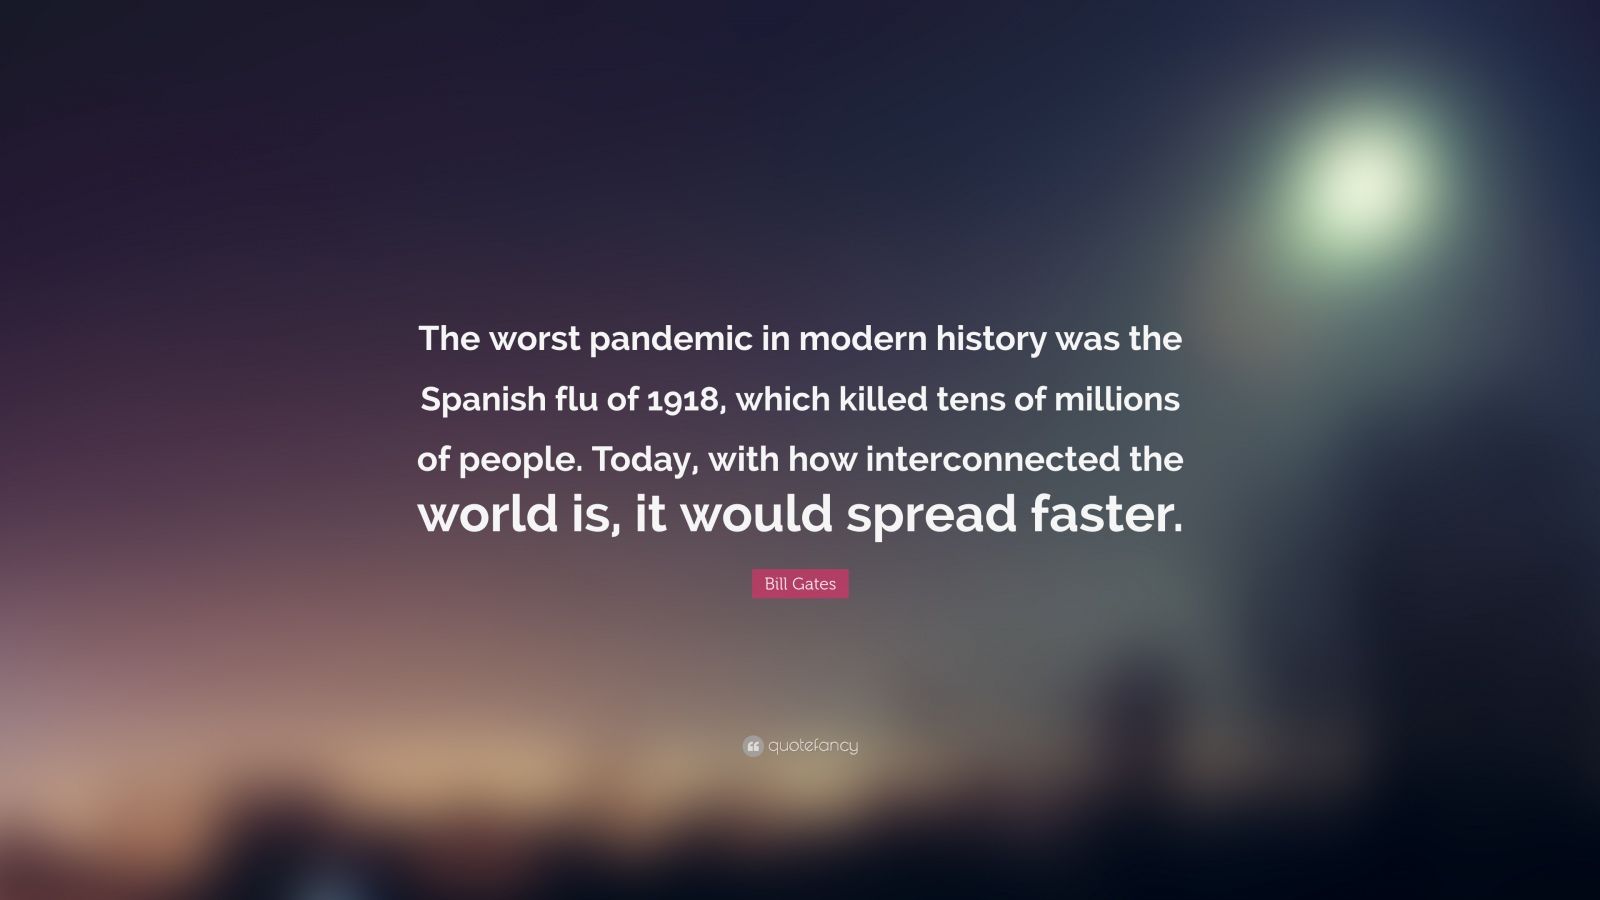 Bill Gates Quote: “The worst pandemic in modern history was the Spanish